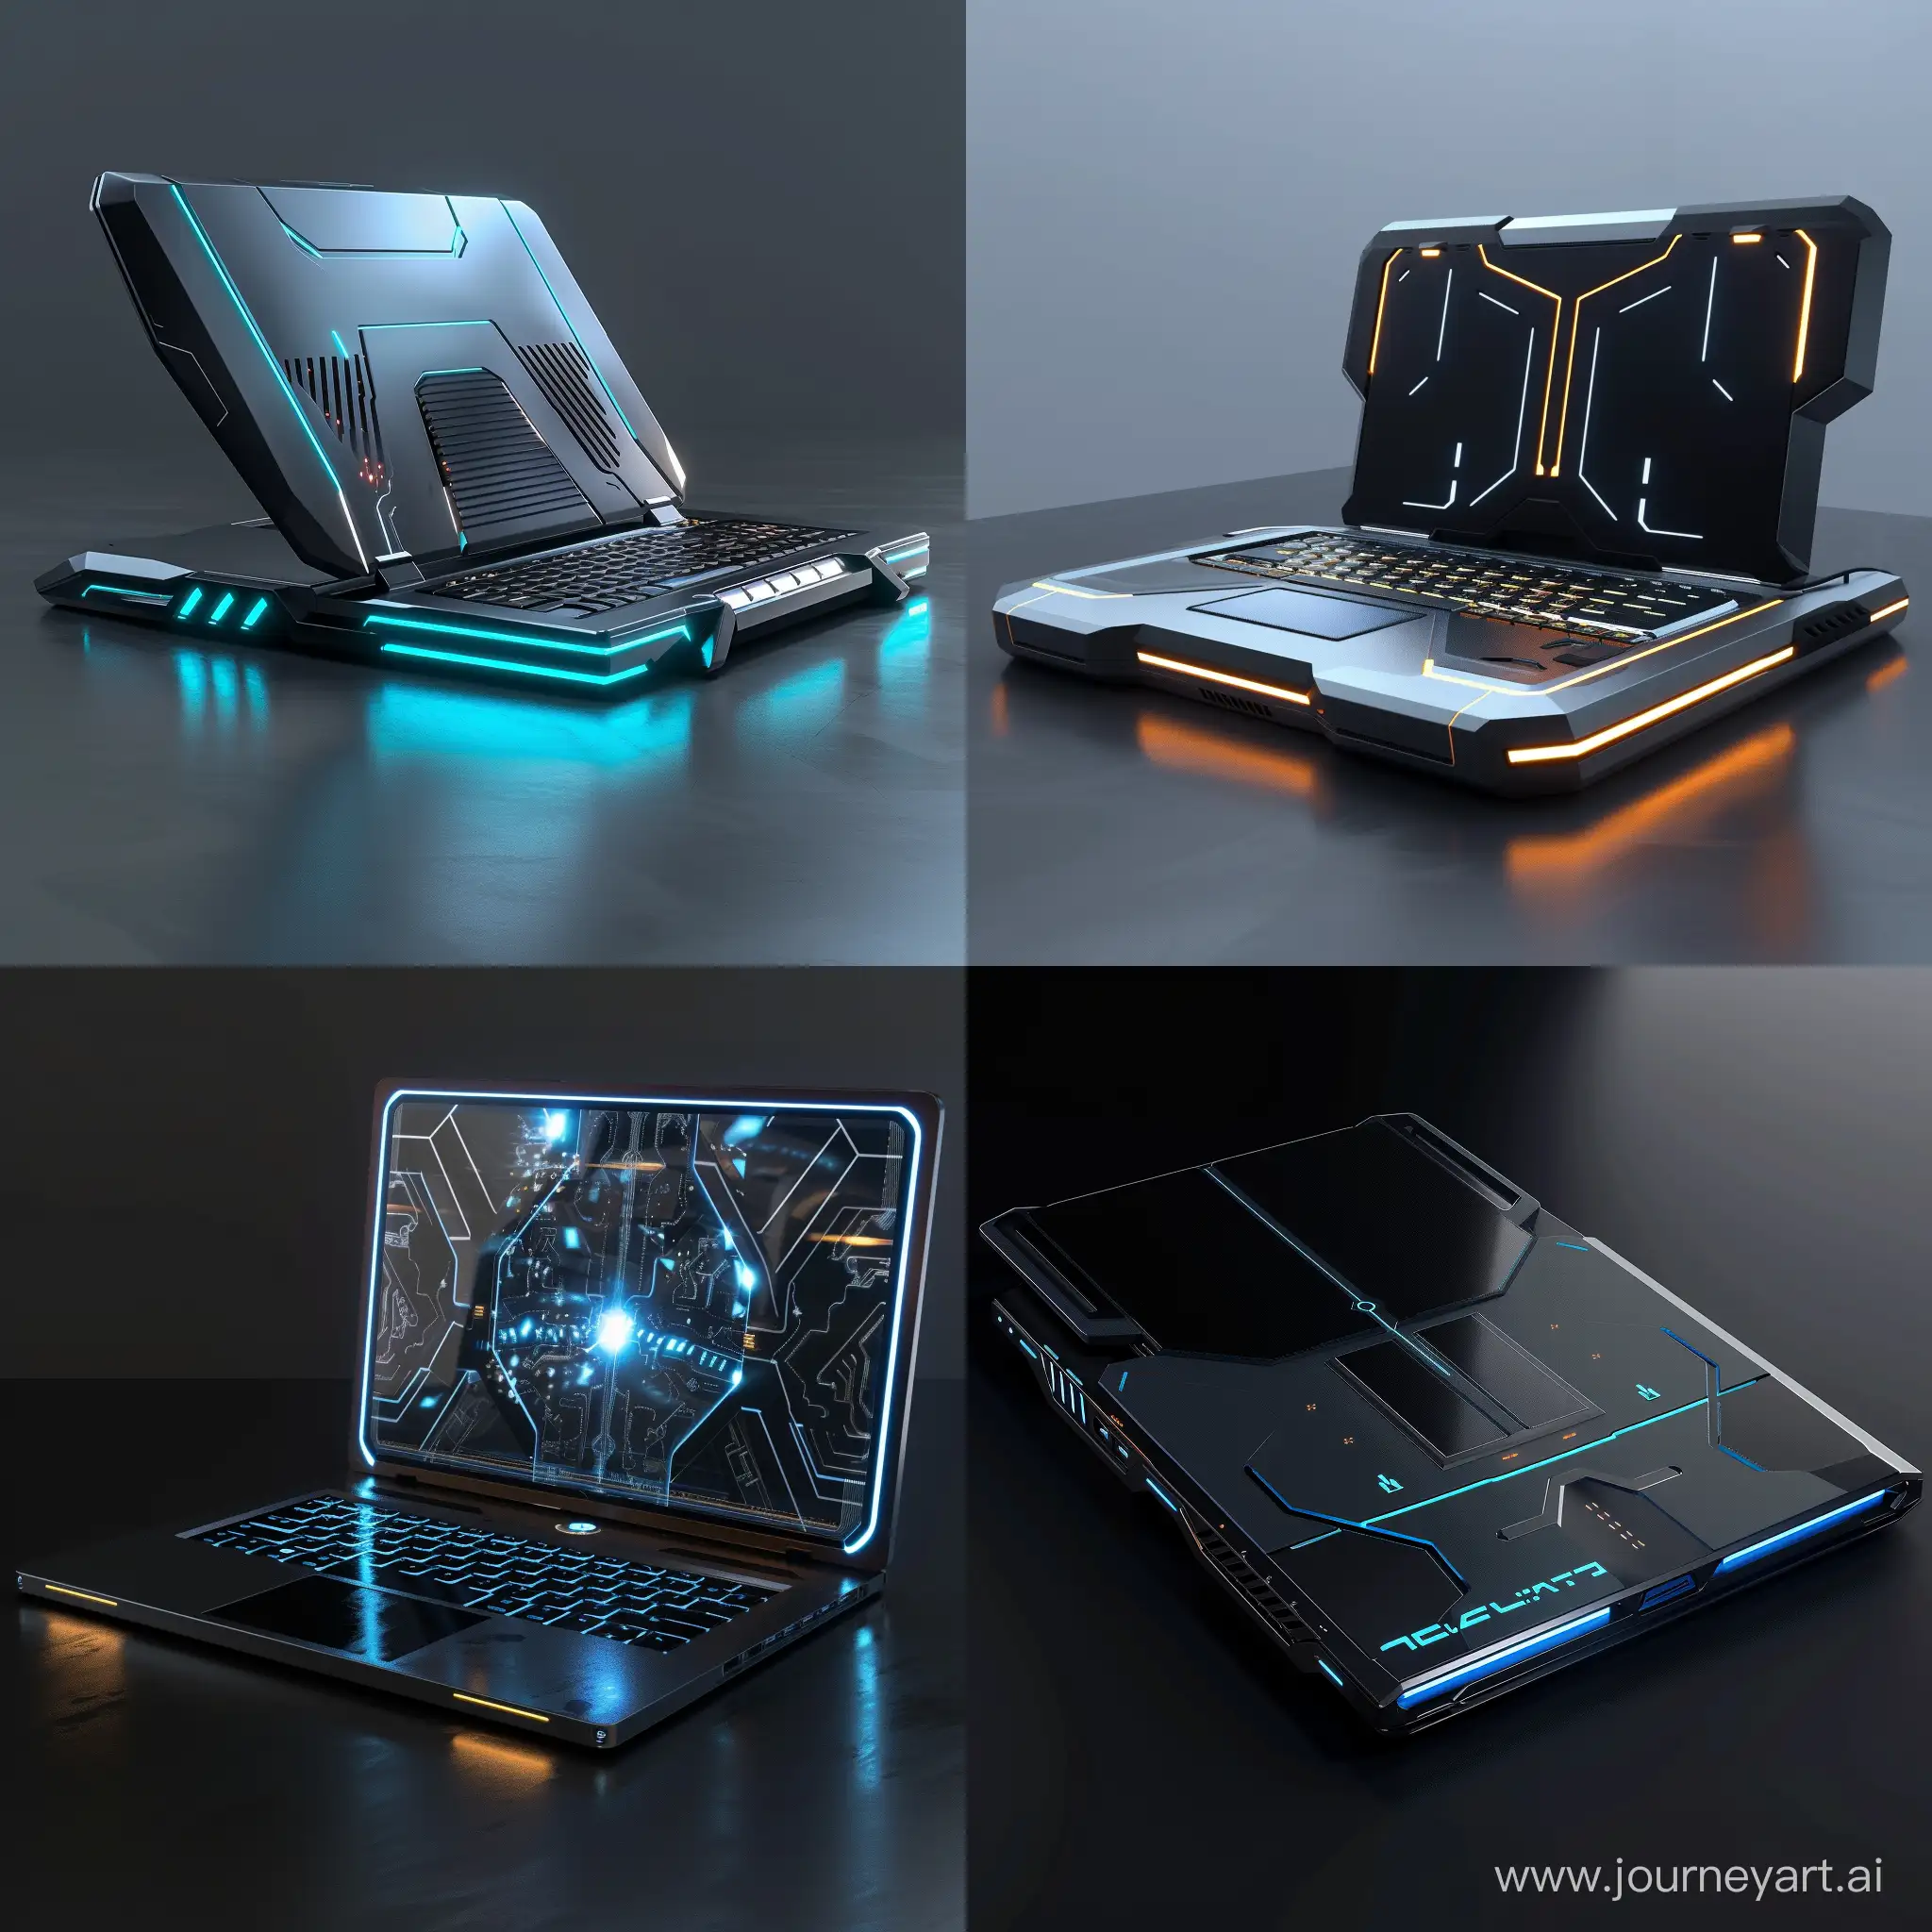 Futuristic-UltraResistant-Laptop-with-Octane-Render-Technology